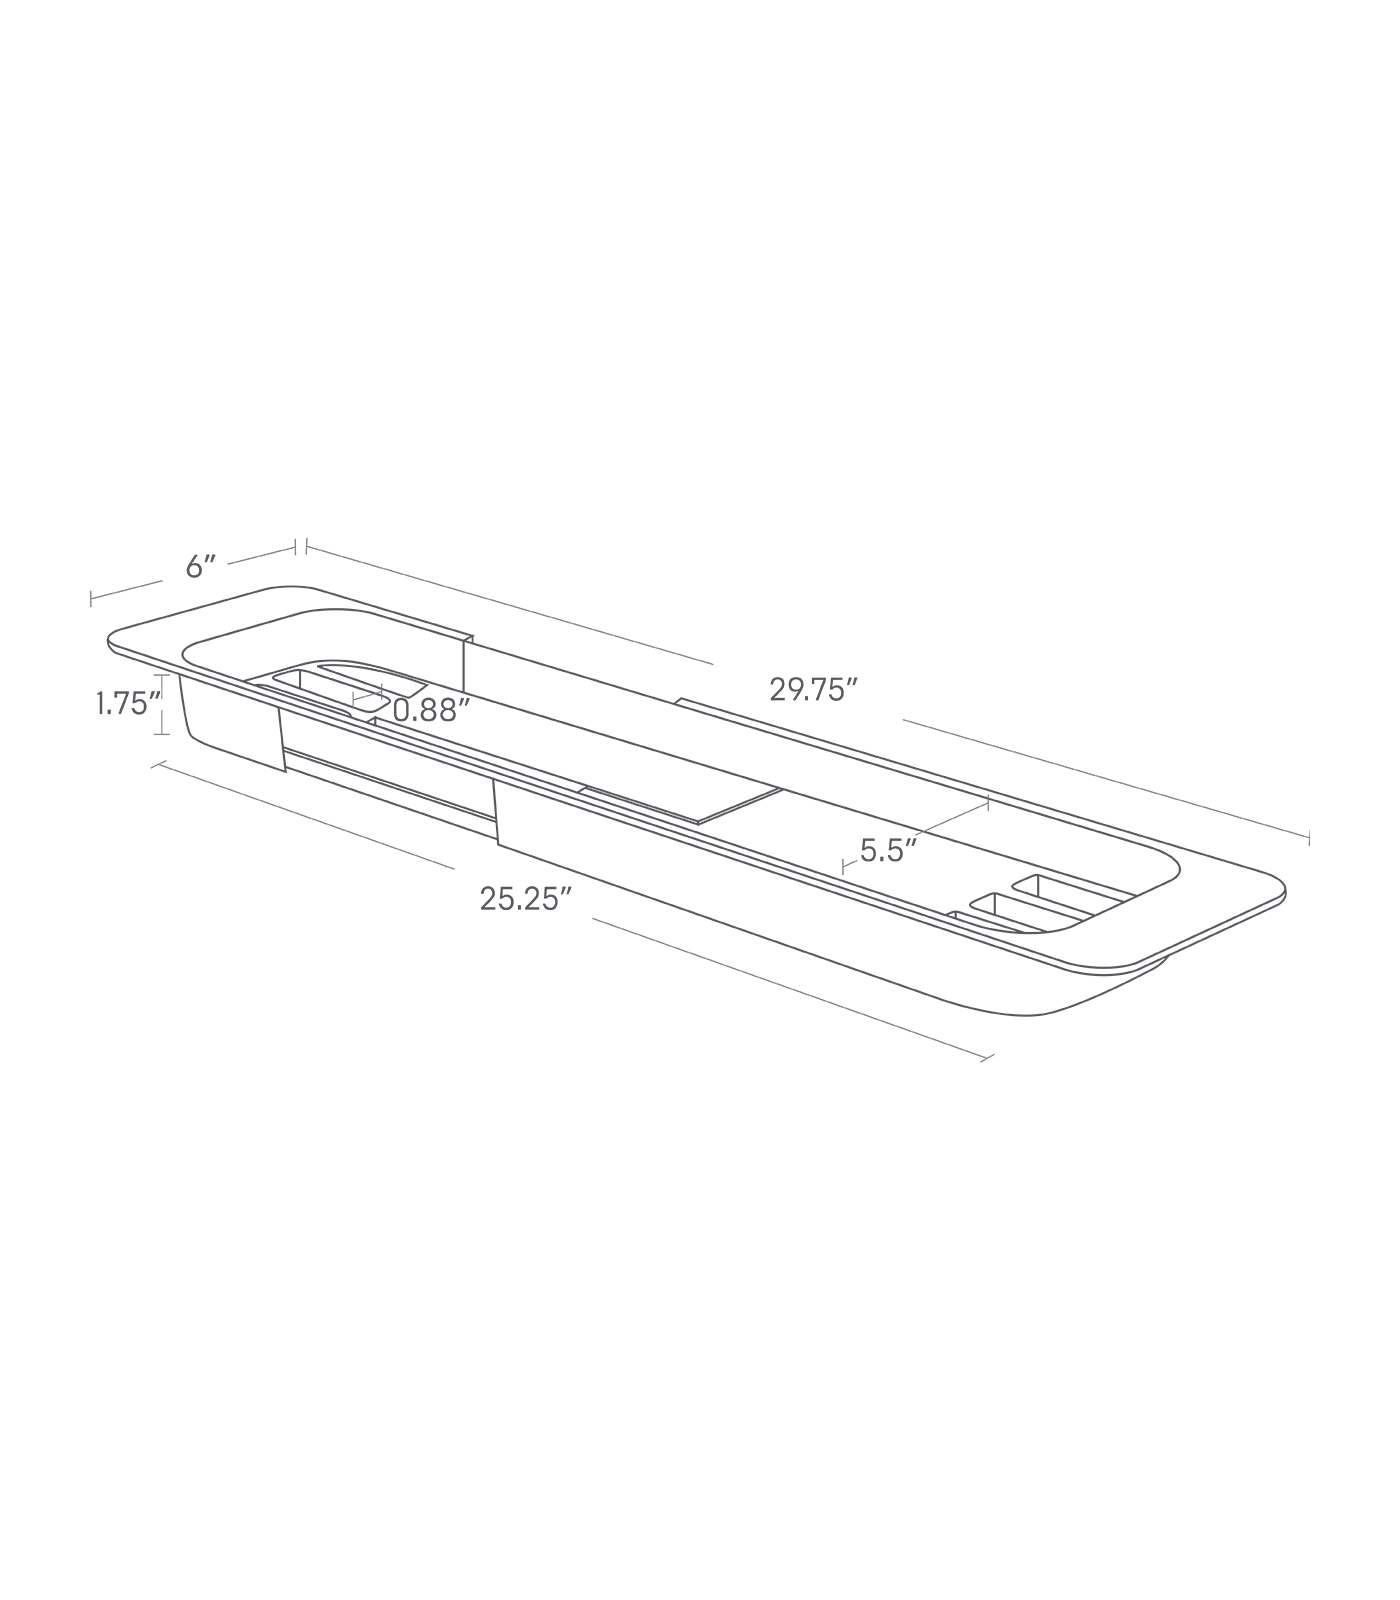 Dimension image for Expandable Bathtub Caddy showing a total length of 25.25